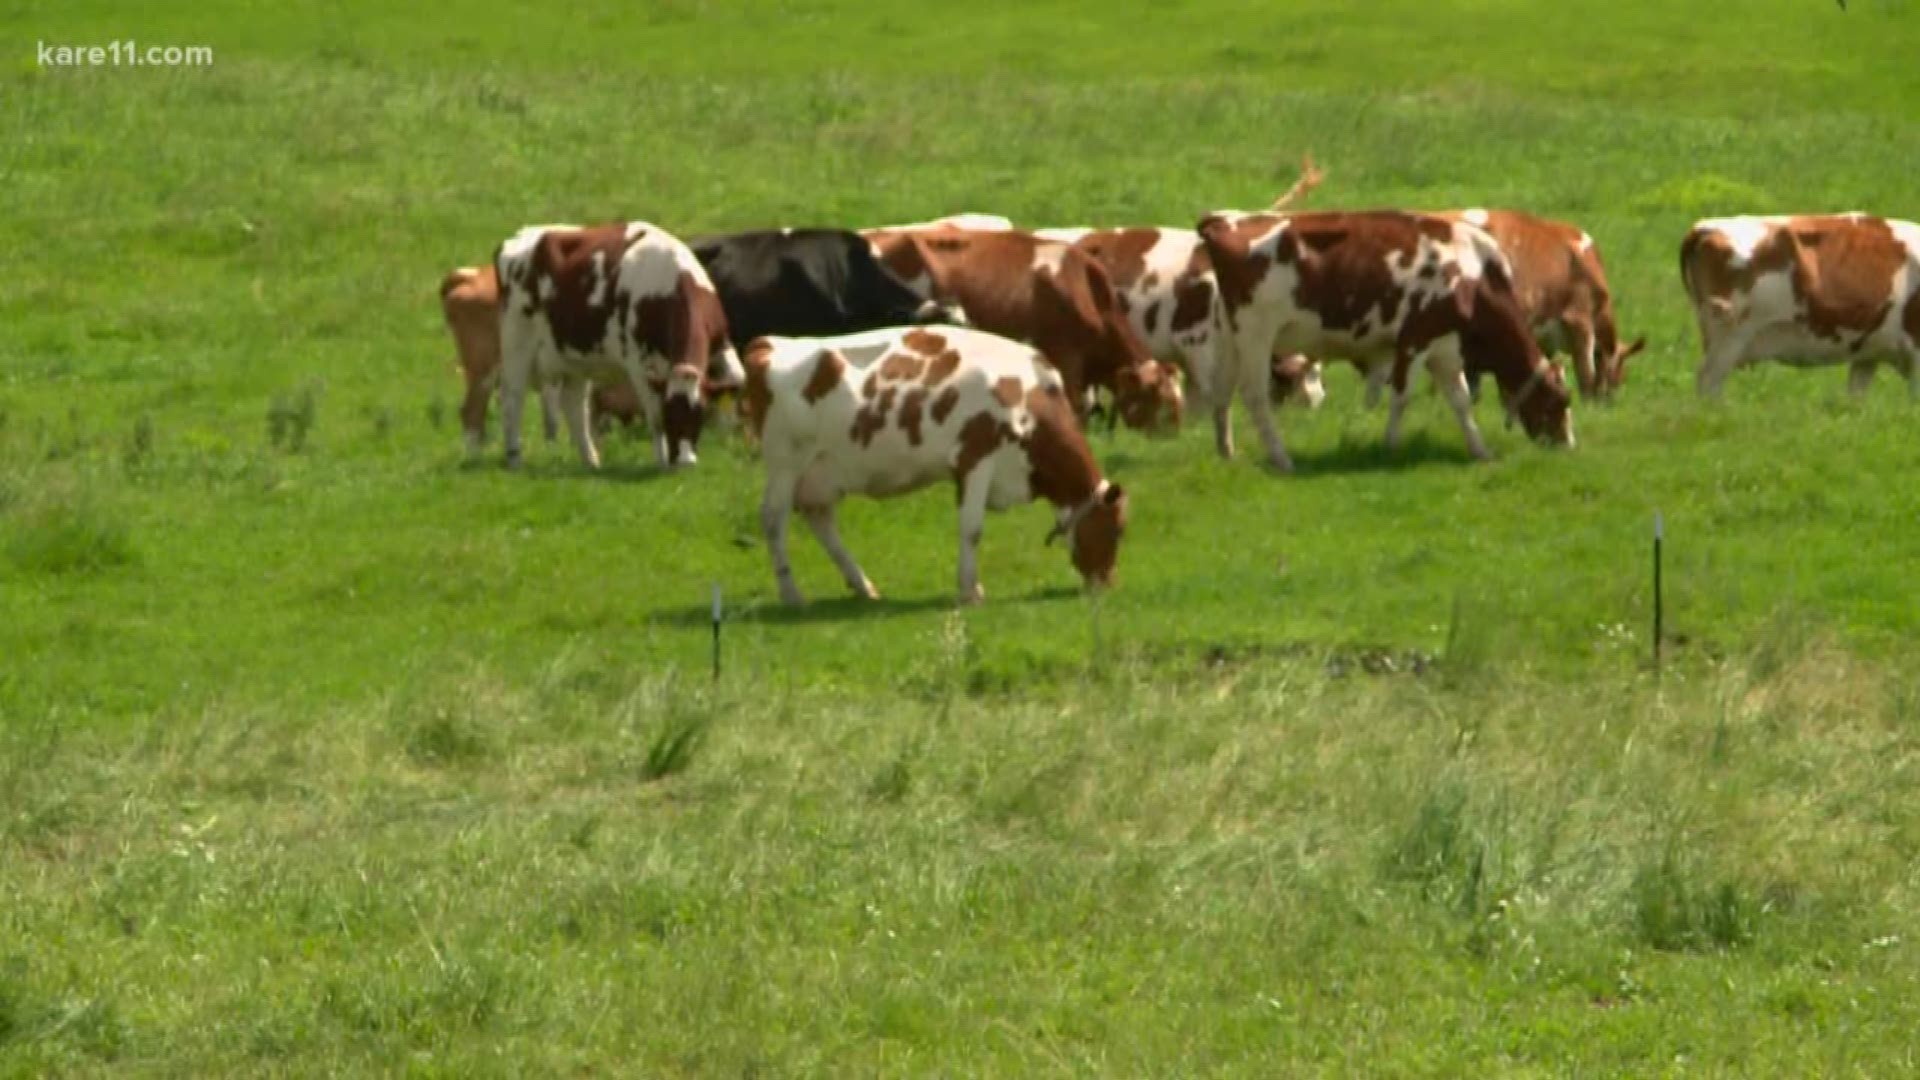 The owners, Neil and Janice Jensen, tell KARE 11 that out of 300 cows, one calf died.